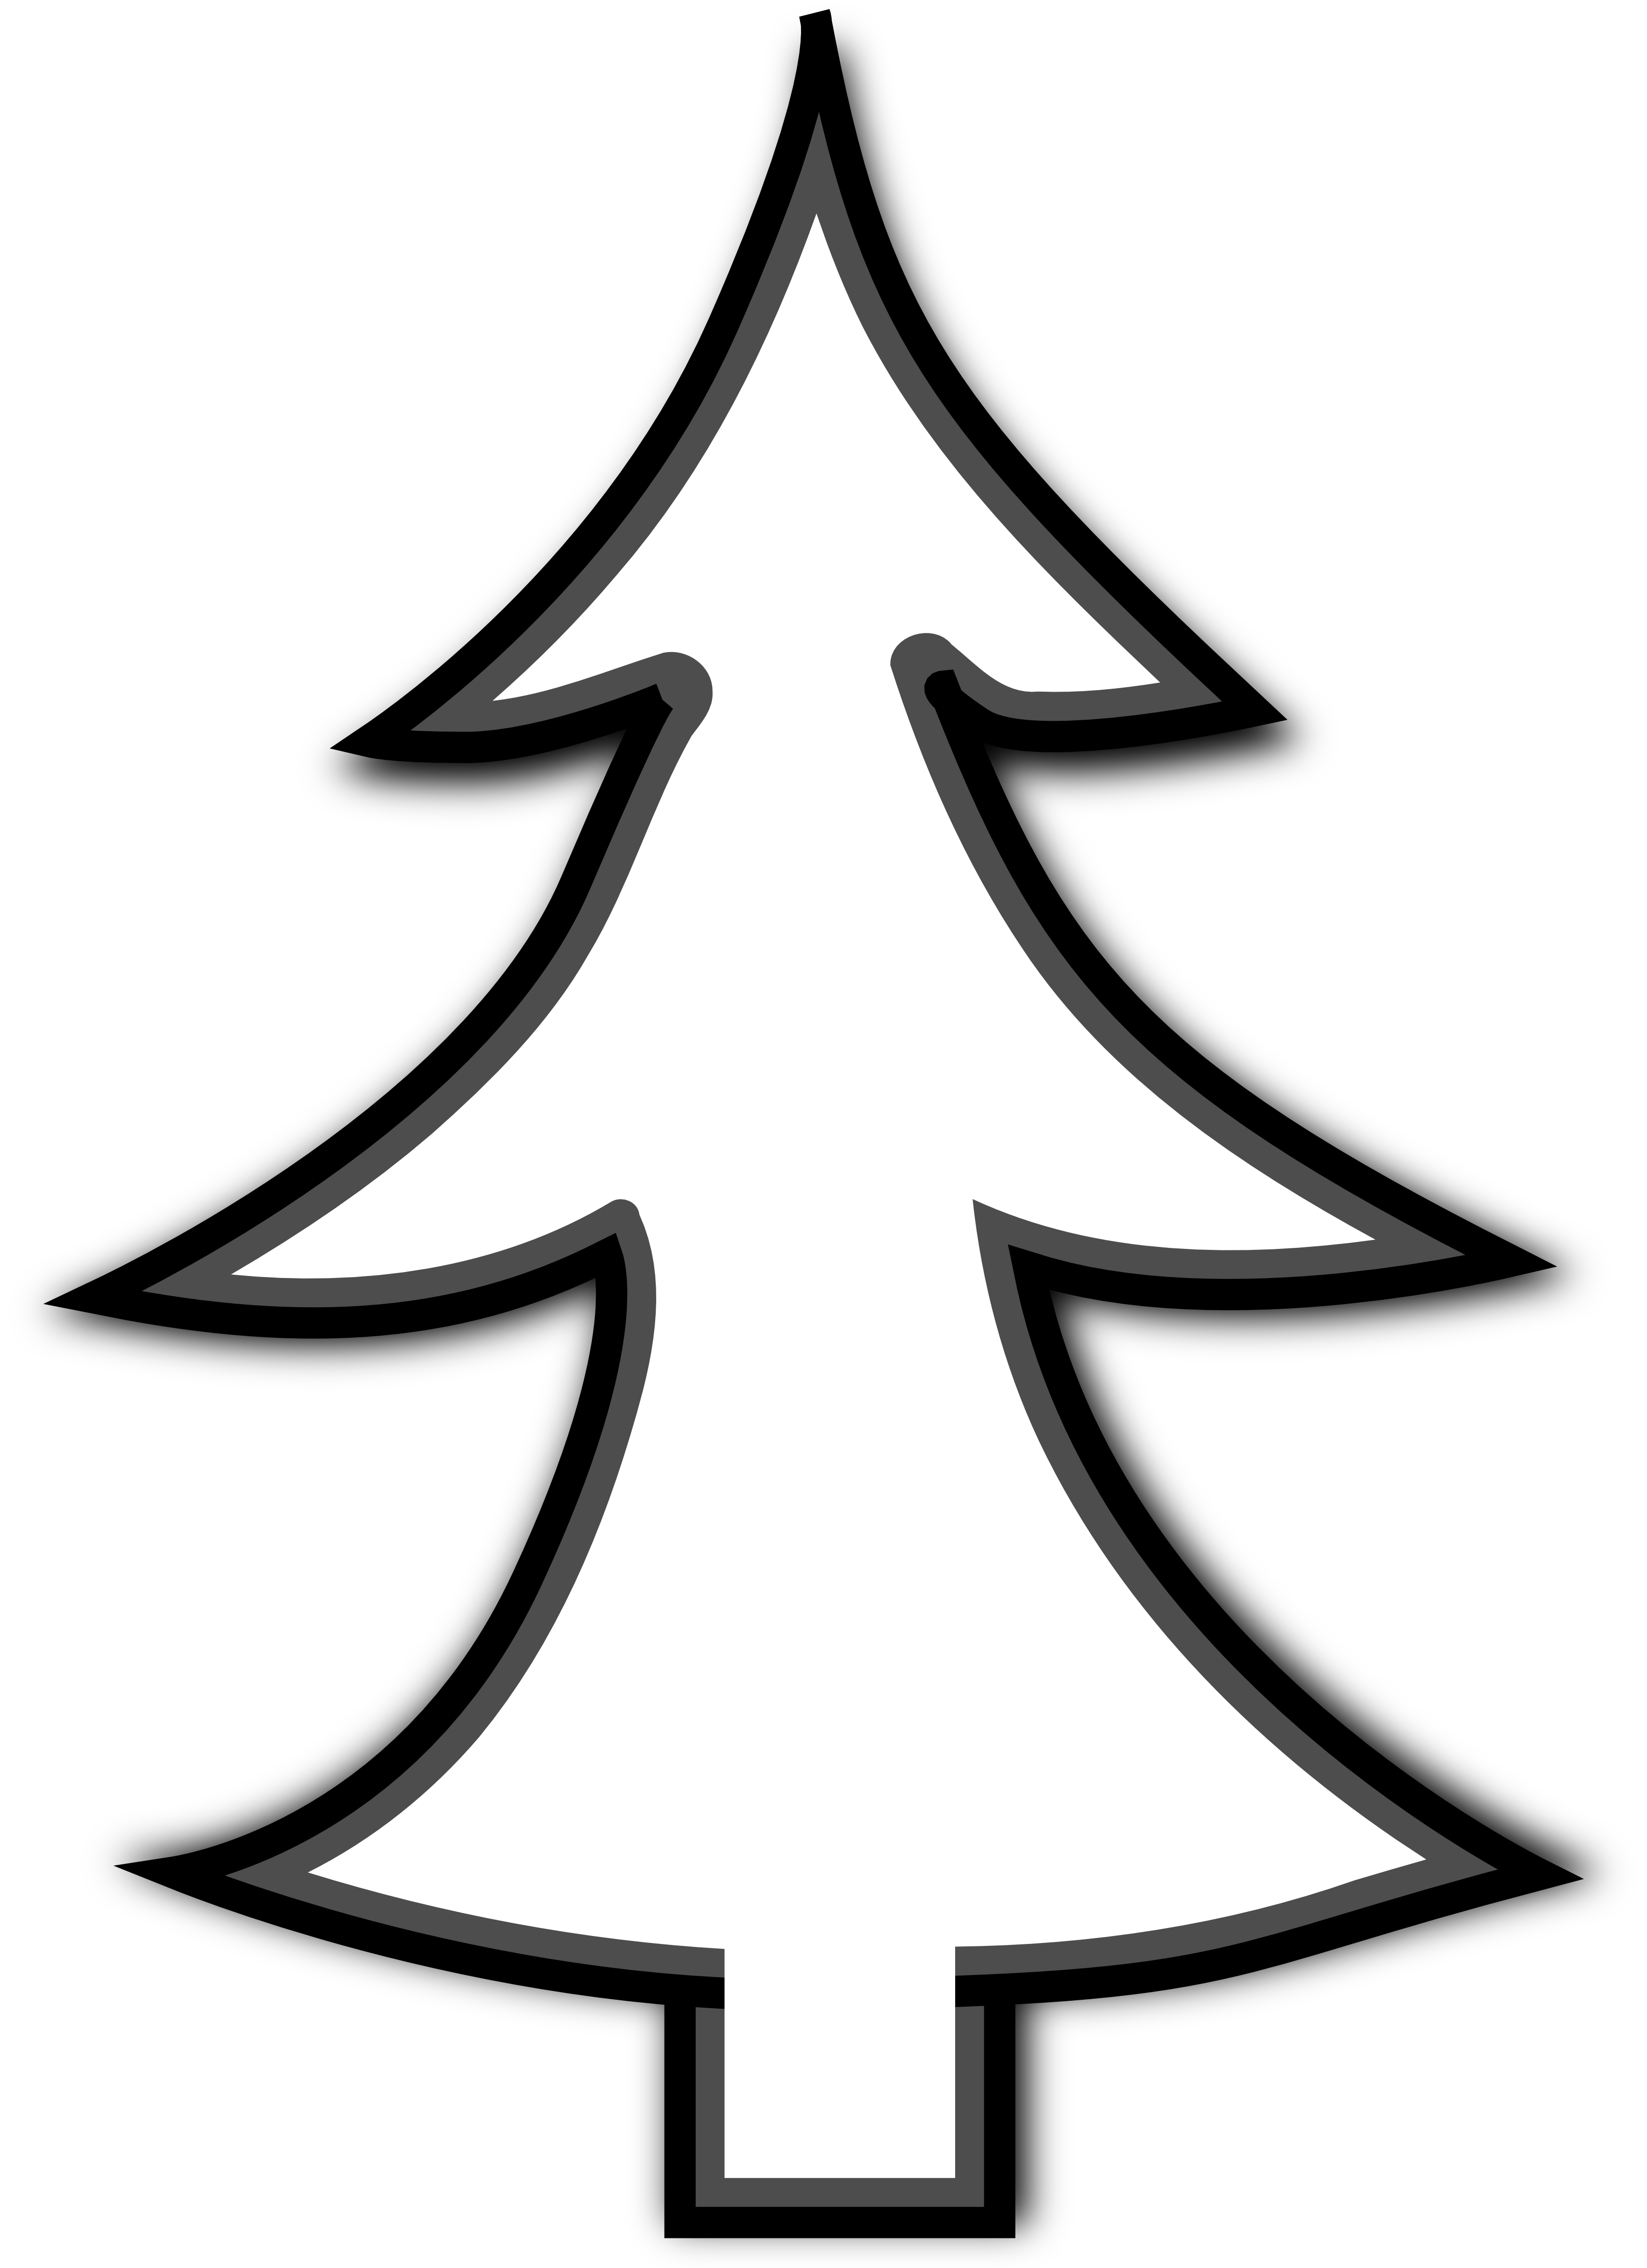 Christmas Tree Clip Art Black And White - ClipArt Best